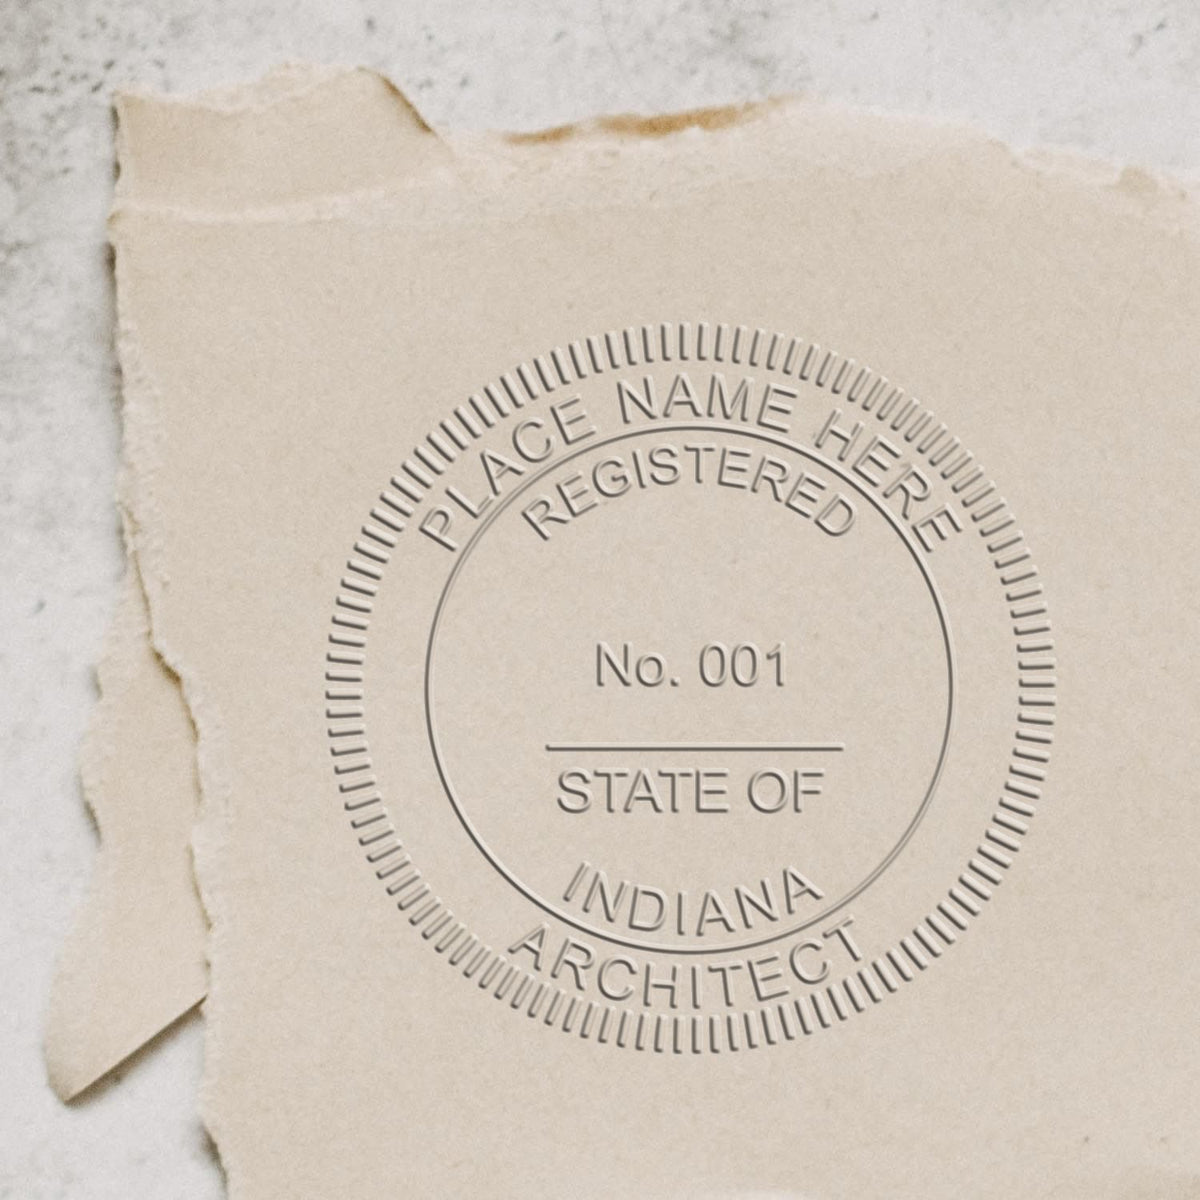 The Gift Indiana Architect Seal stamp impression comes to life with a crisp, detailed image stamped on paper - showcasing true professional quality.